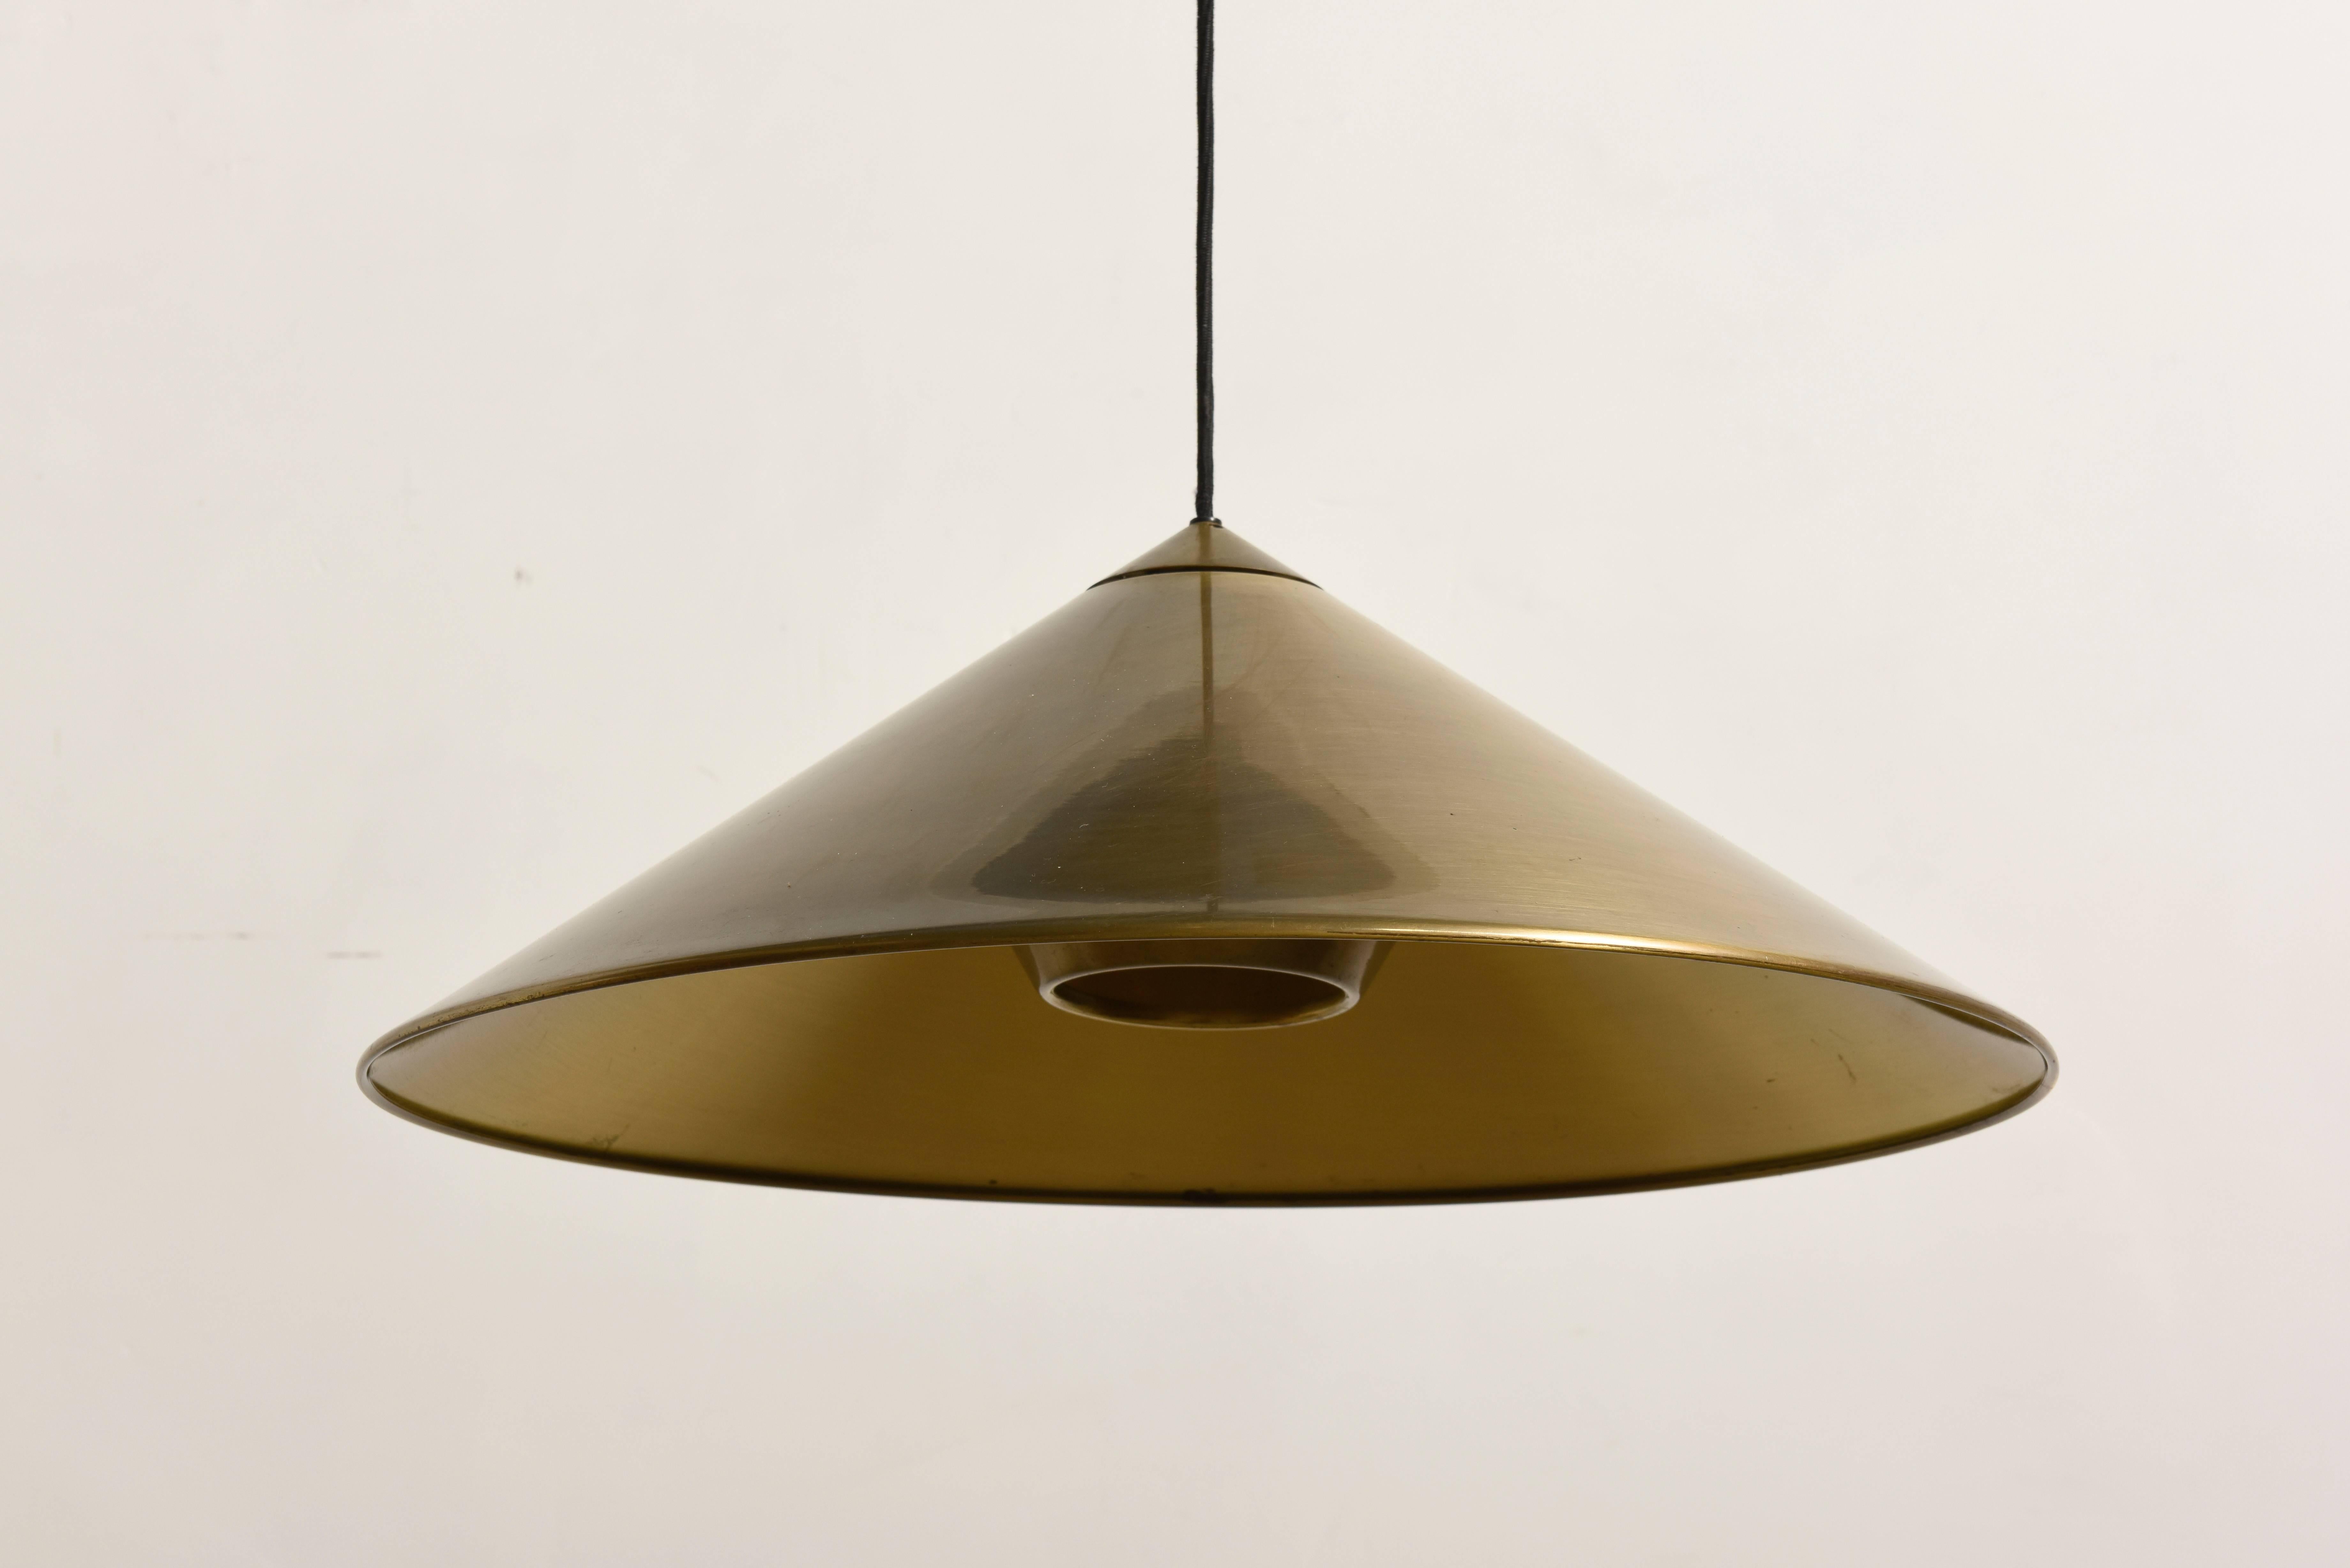 Large elegant adjustable solid counter-balance pendant to easily adjust the light in height,brass brushed shade with diffuser designed by Florian Schulz,Germany.

Beautiful design with diffused light create atmospheric lighting.
Excellent